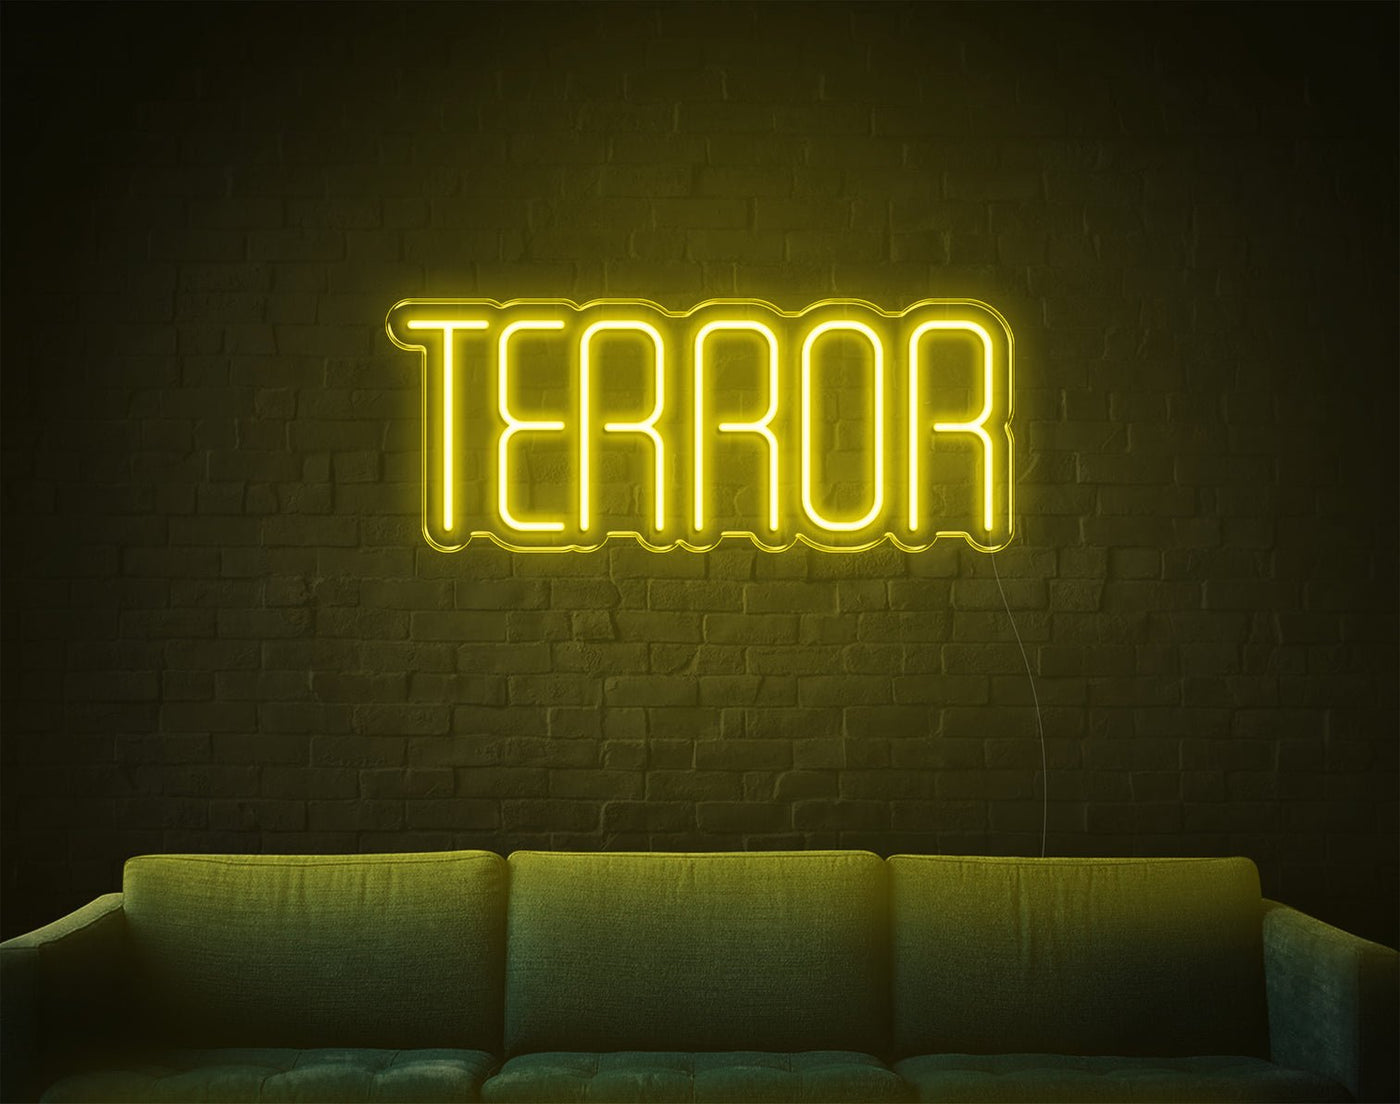 Terror LED Neon Sign - 10inch x 24inchYellow